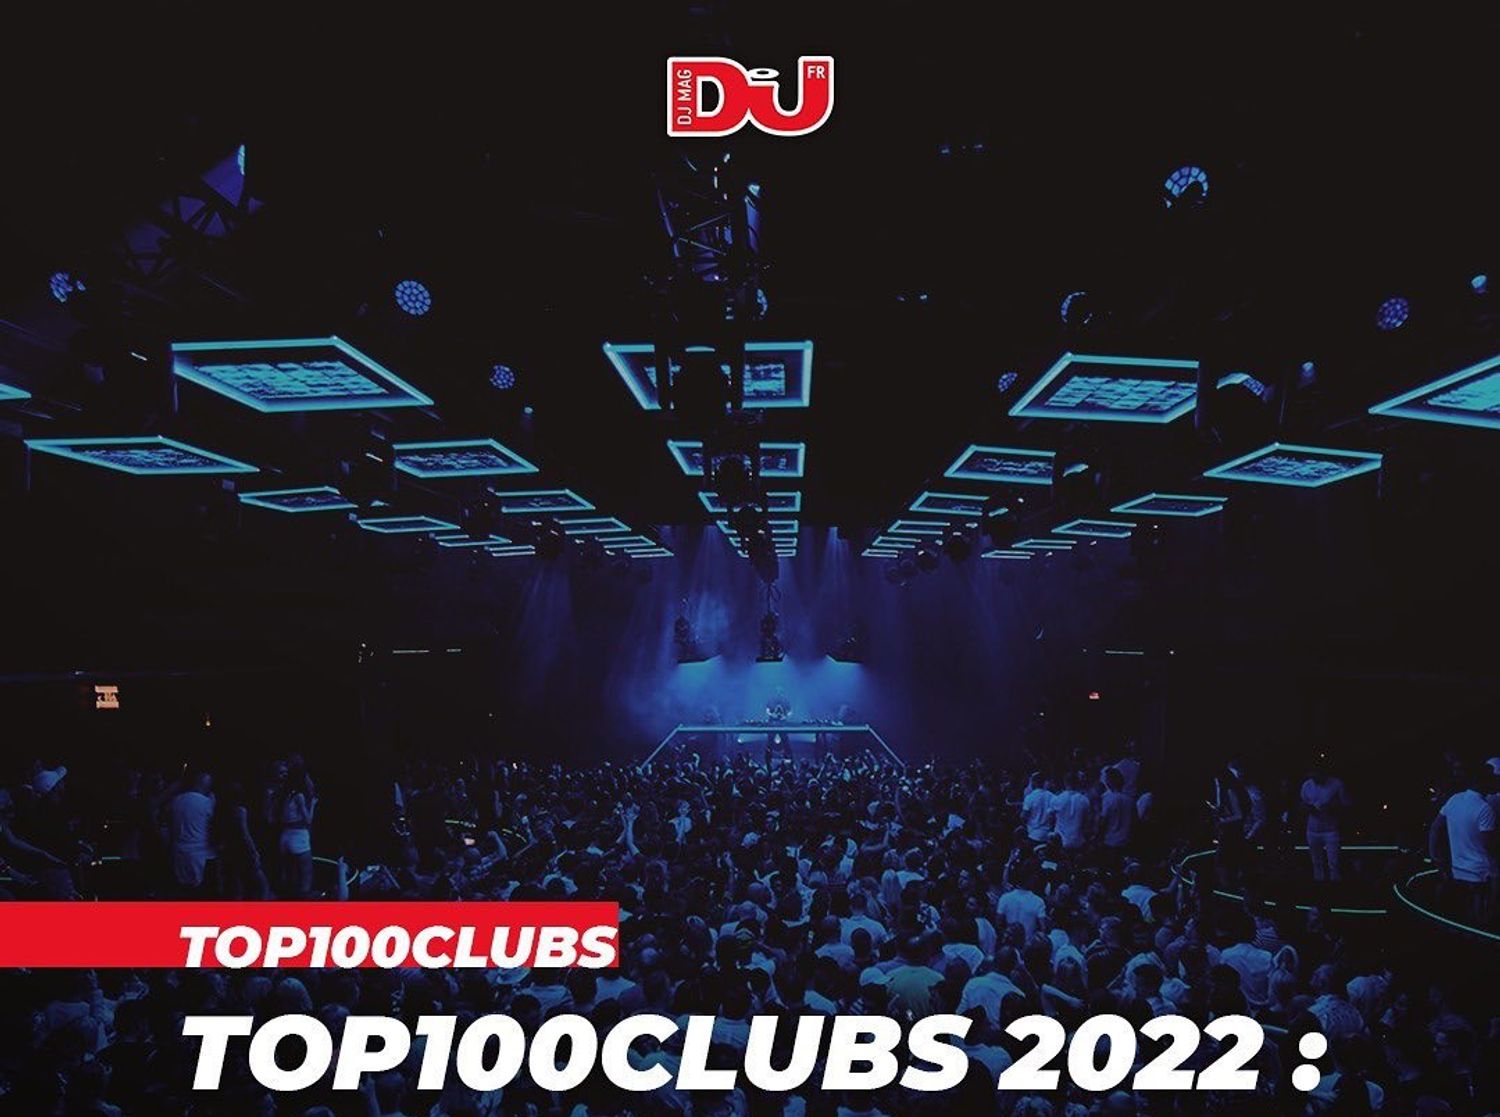 Top 100 Clubs 2022